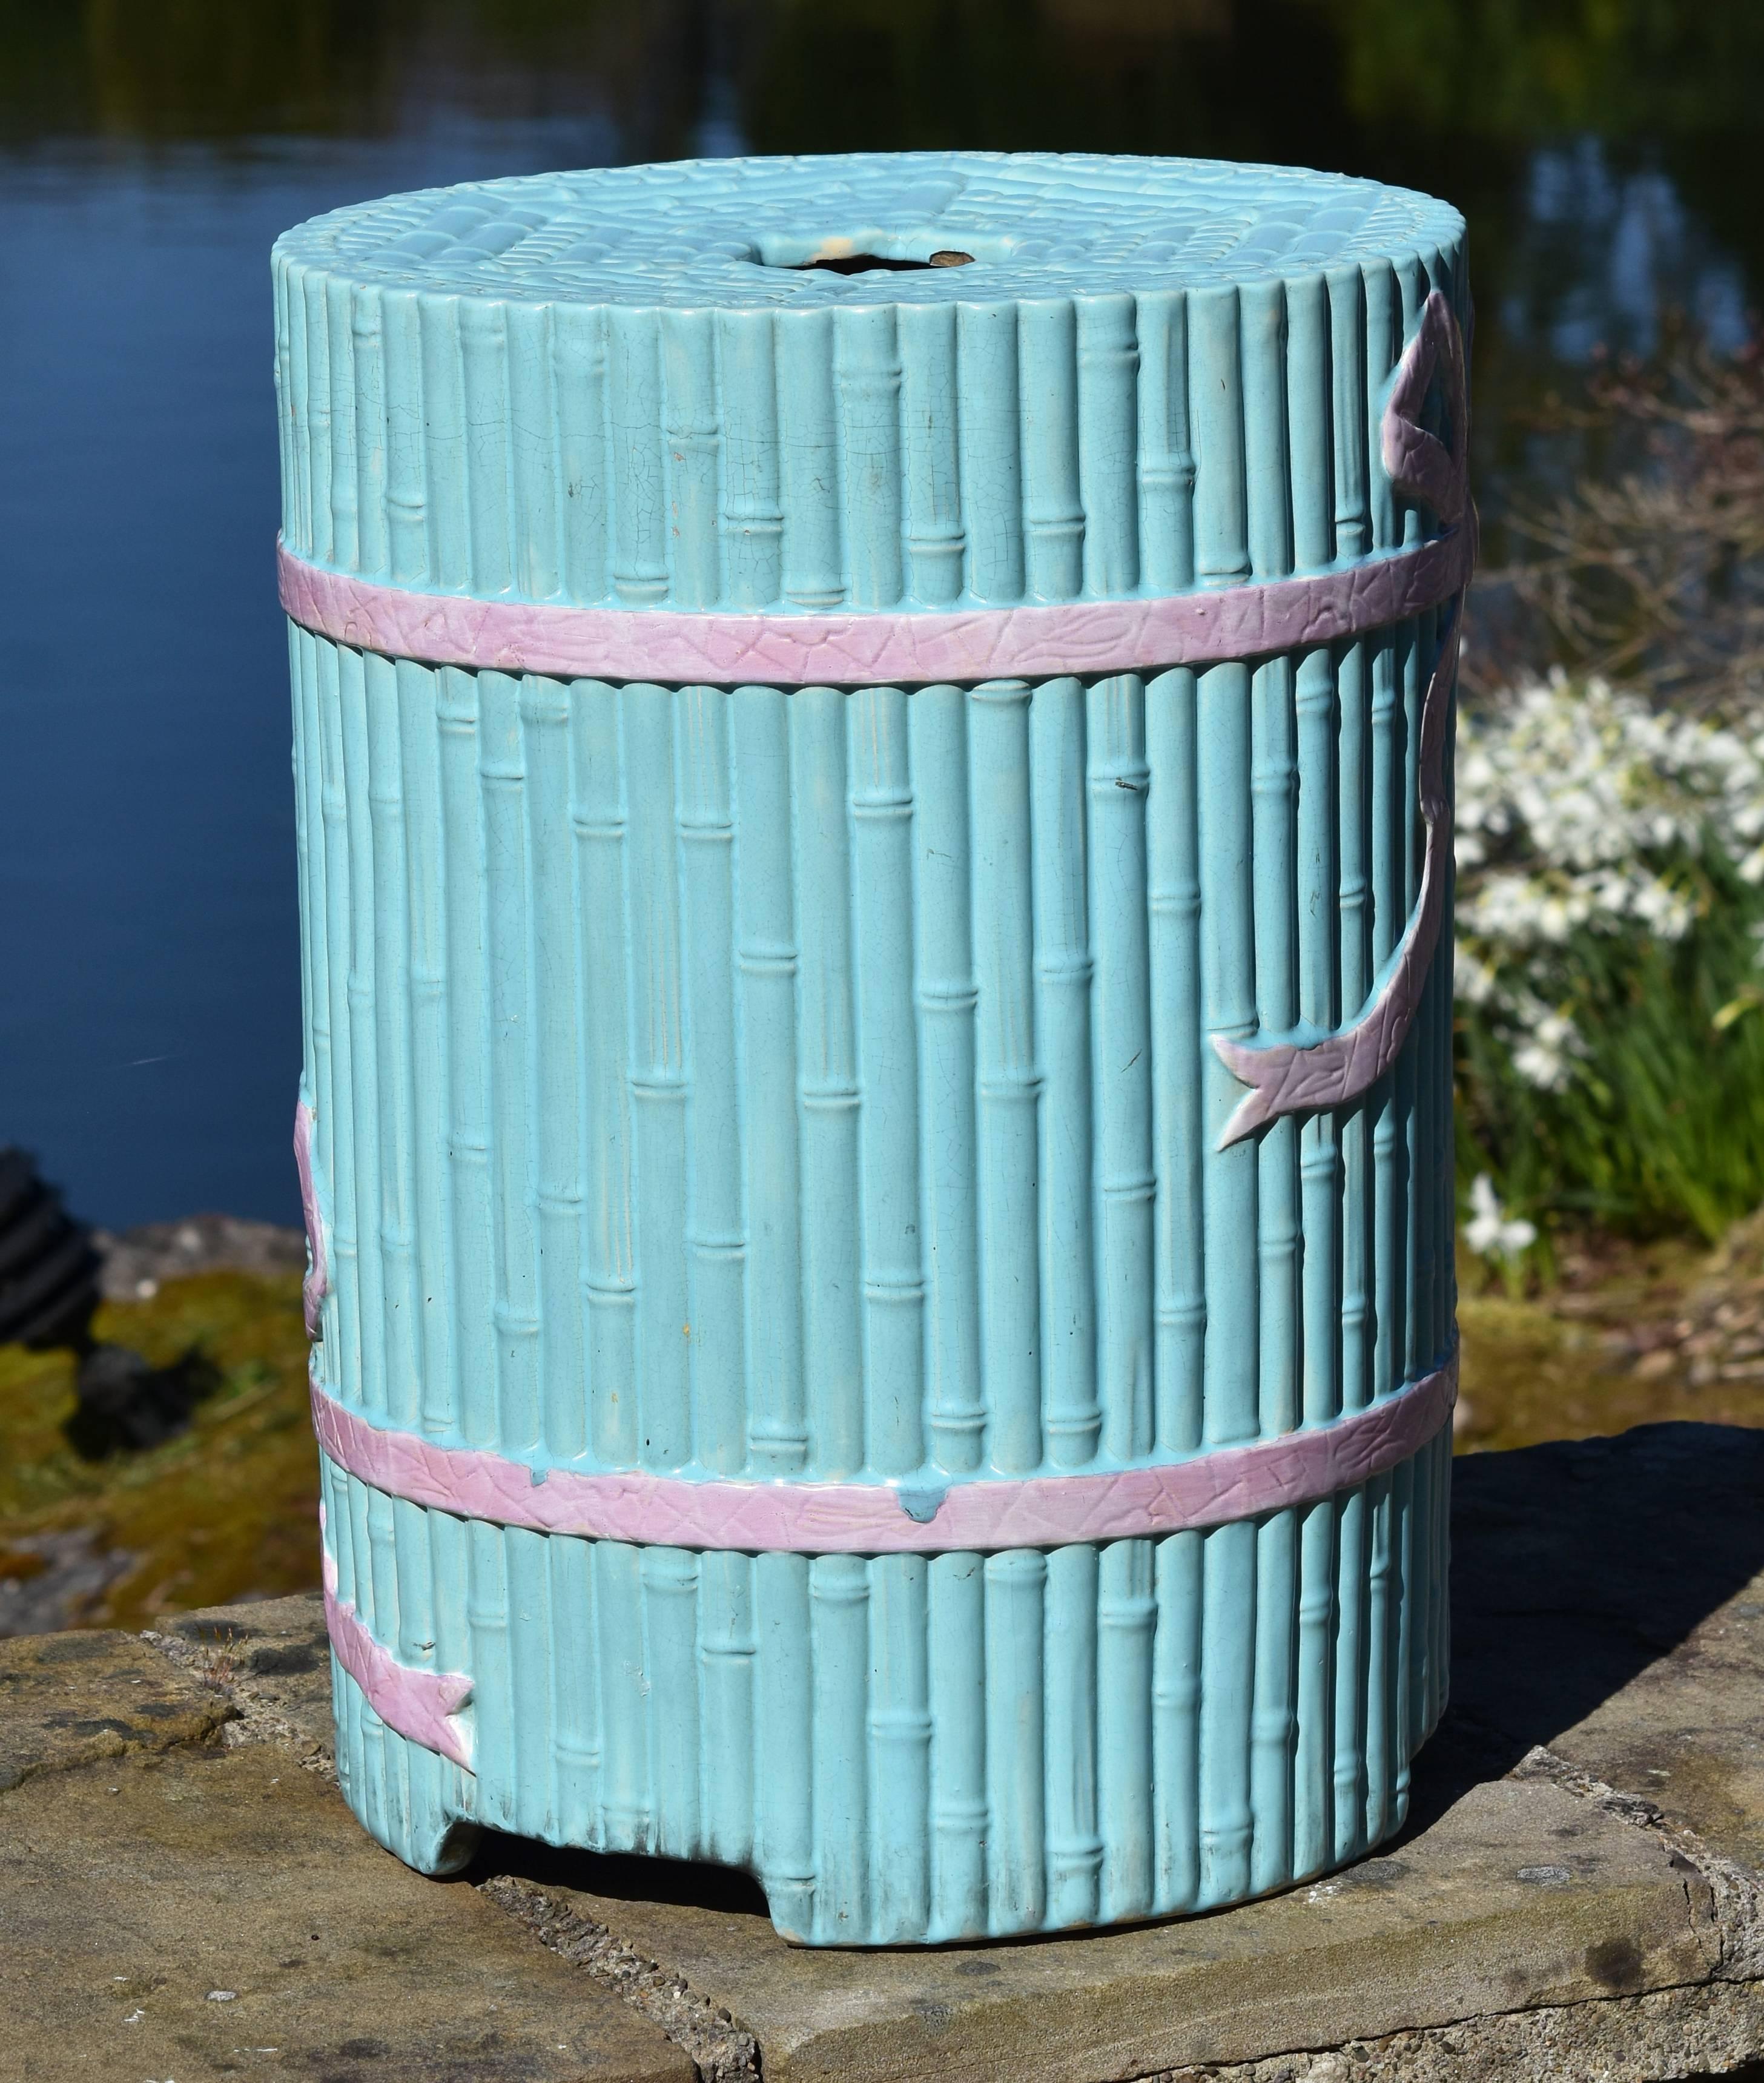 A rare turquoise ground Minton Majolica garden seat, circa 1860 modelled as upright bamboo cane bound together by two pink ribbons tied in bows.
Traditionally in China, harvested bamboo canes were stored upright and bound with ribbon hence this